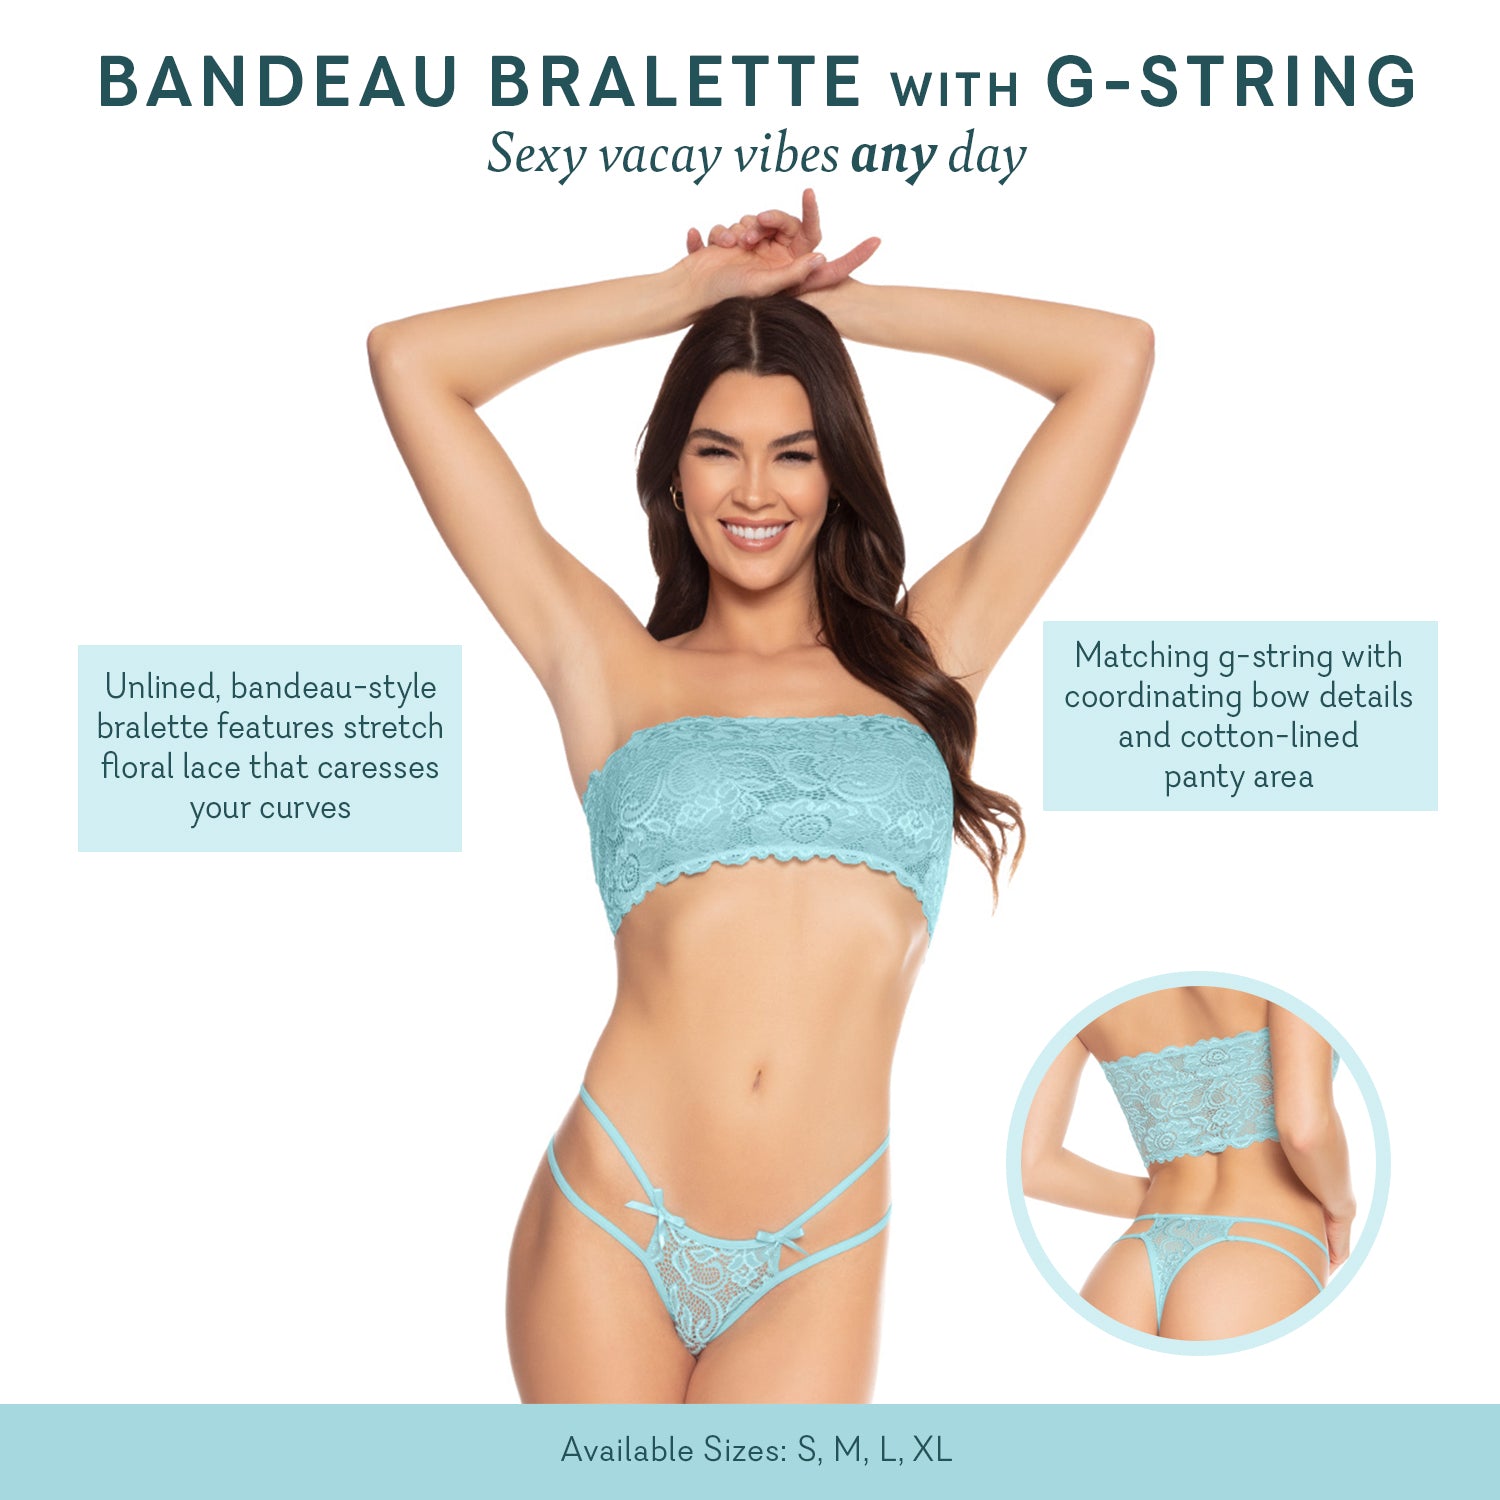 Bandeau Bralette with G-string – Pure Romance